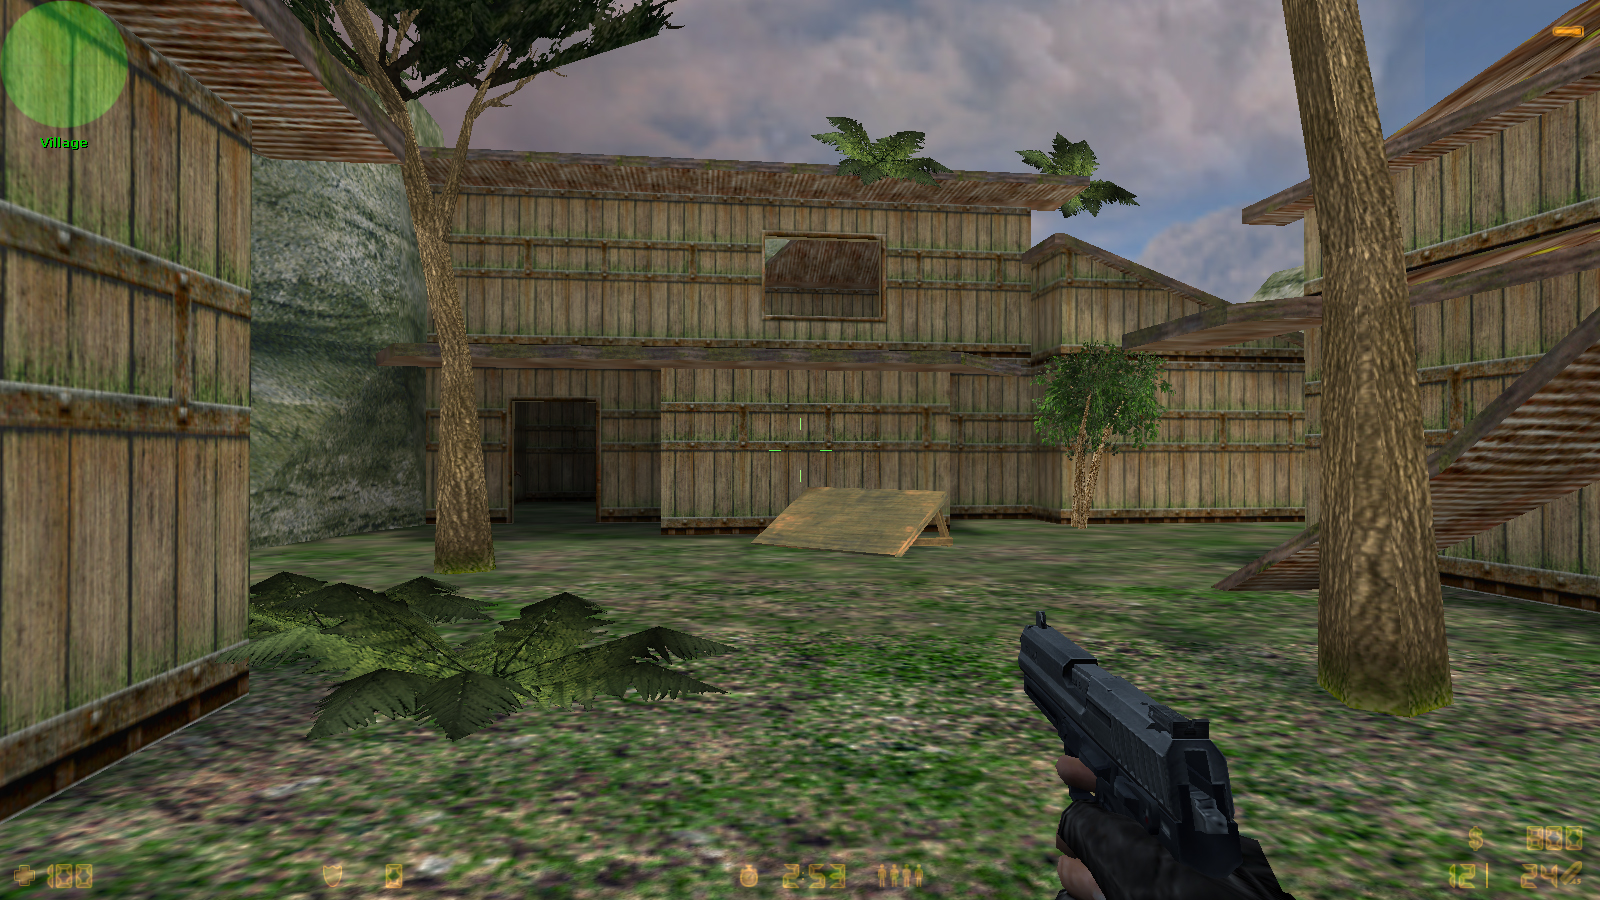 Counter strike 1.6 for mac